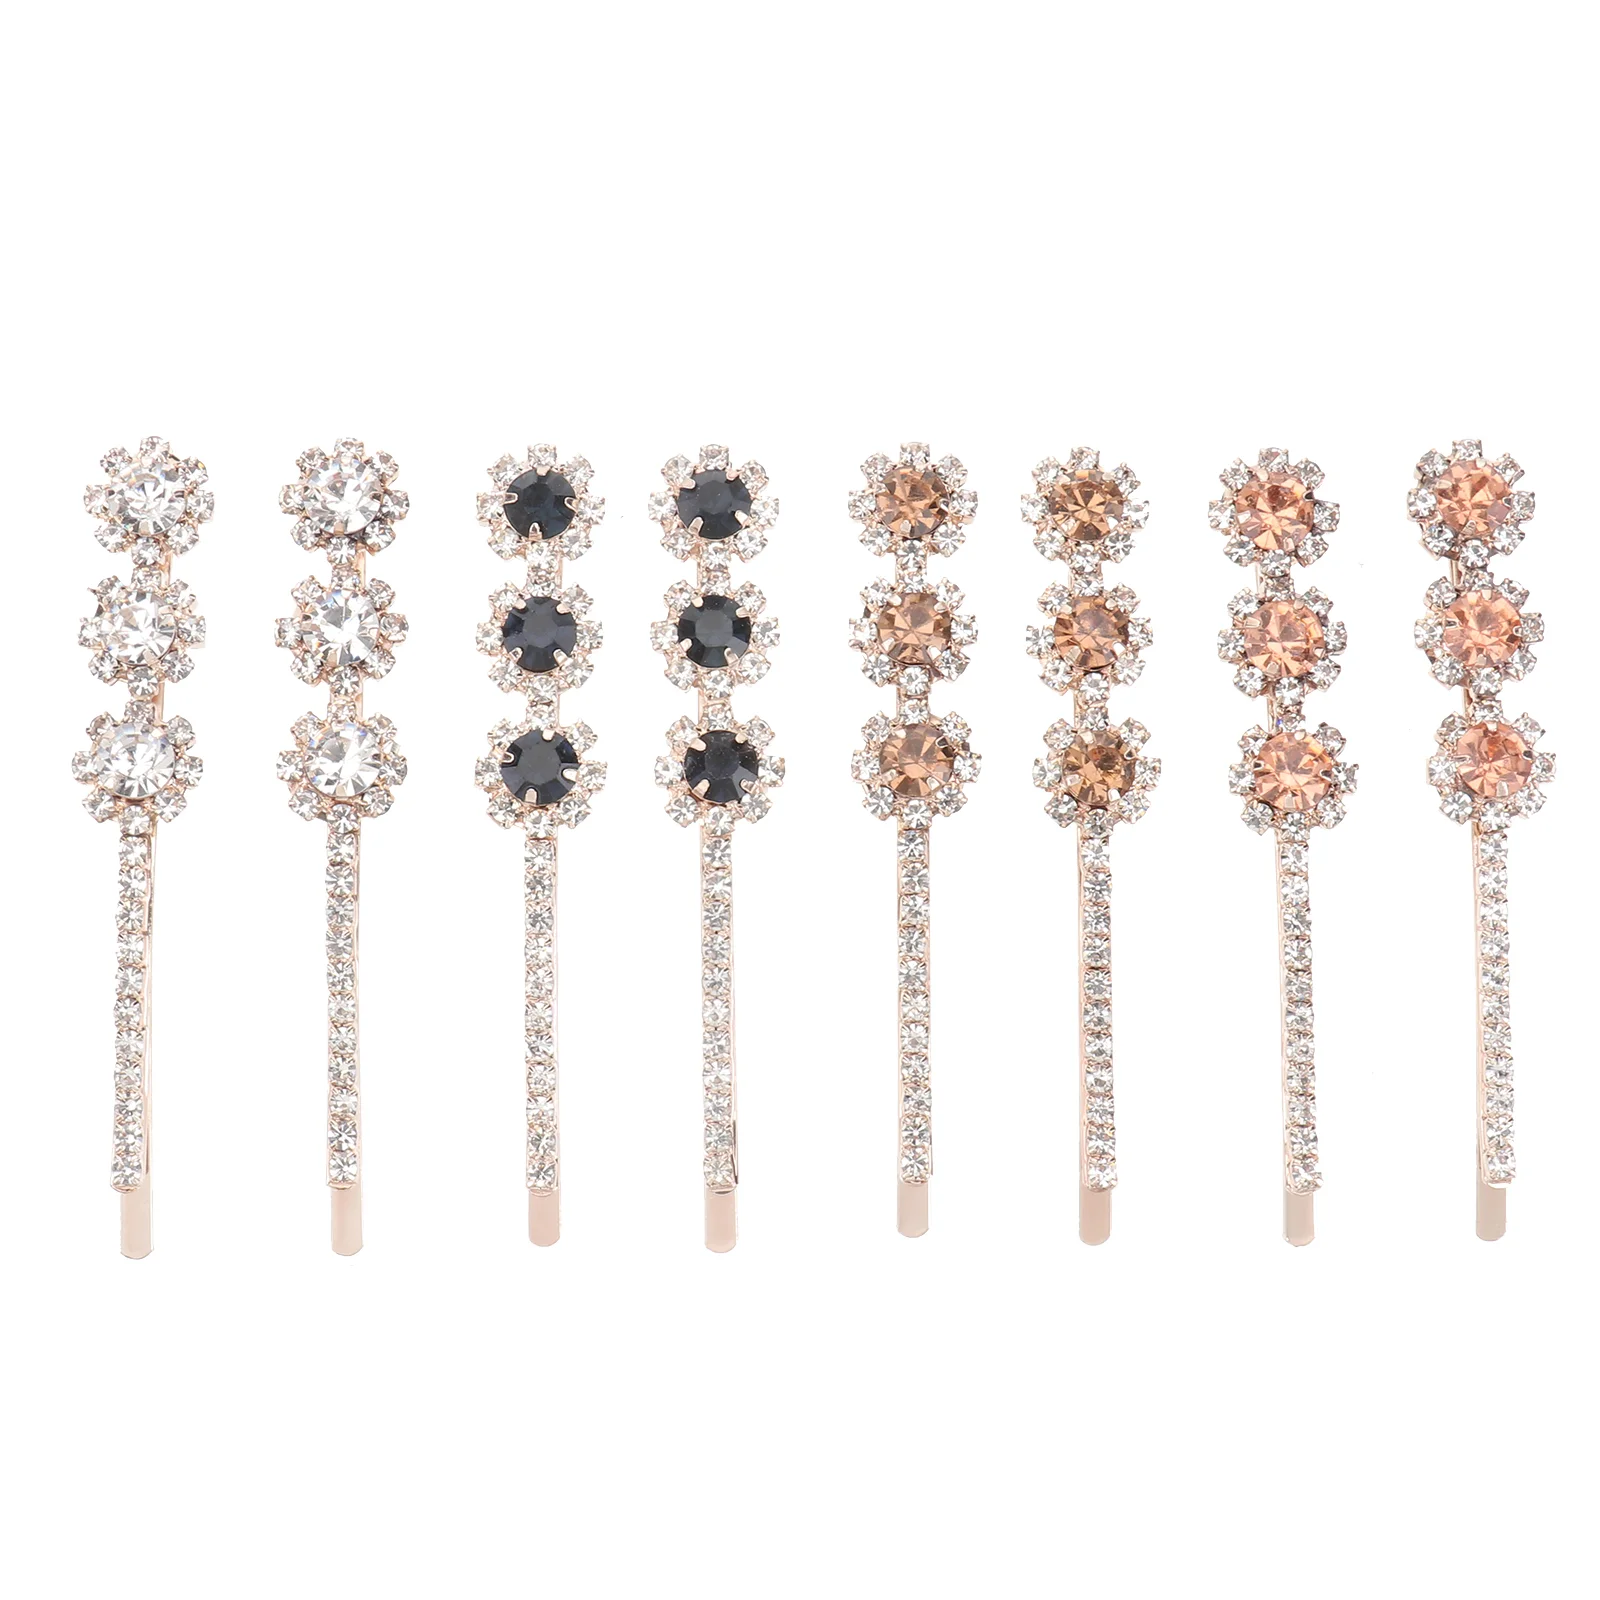 

8pcs Rhinestone Bobby Clear Hair Clips Metal Hair Barrettes Headpieces for ( Navy, Champagne, Light Yellow, White 2pcs Each )